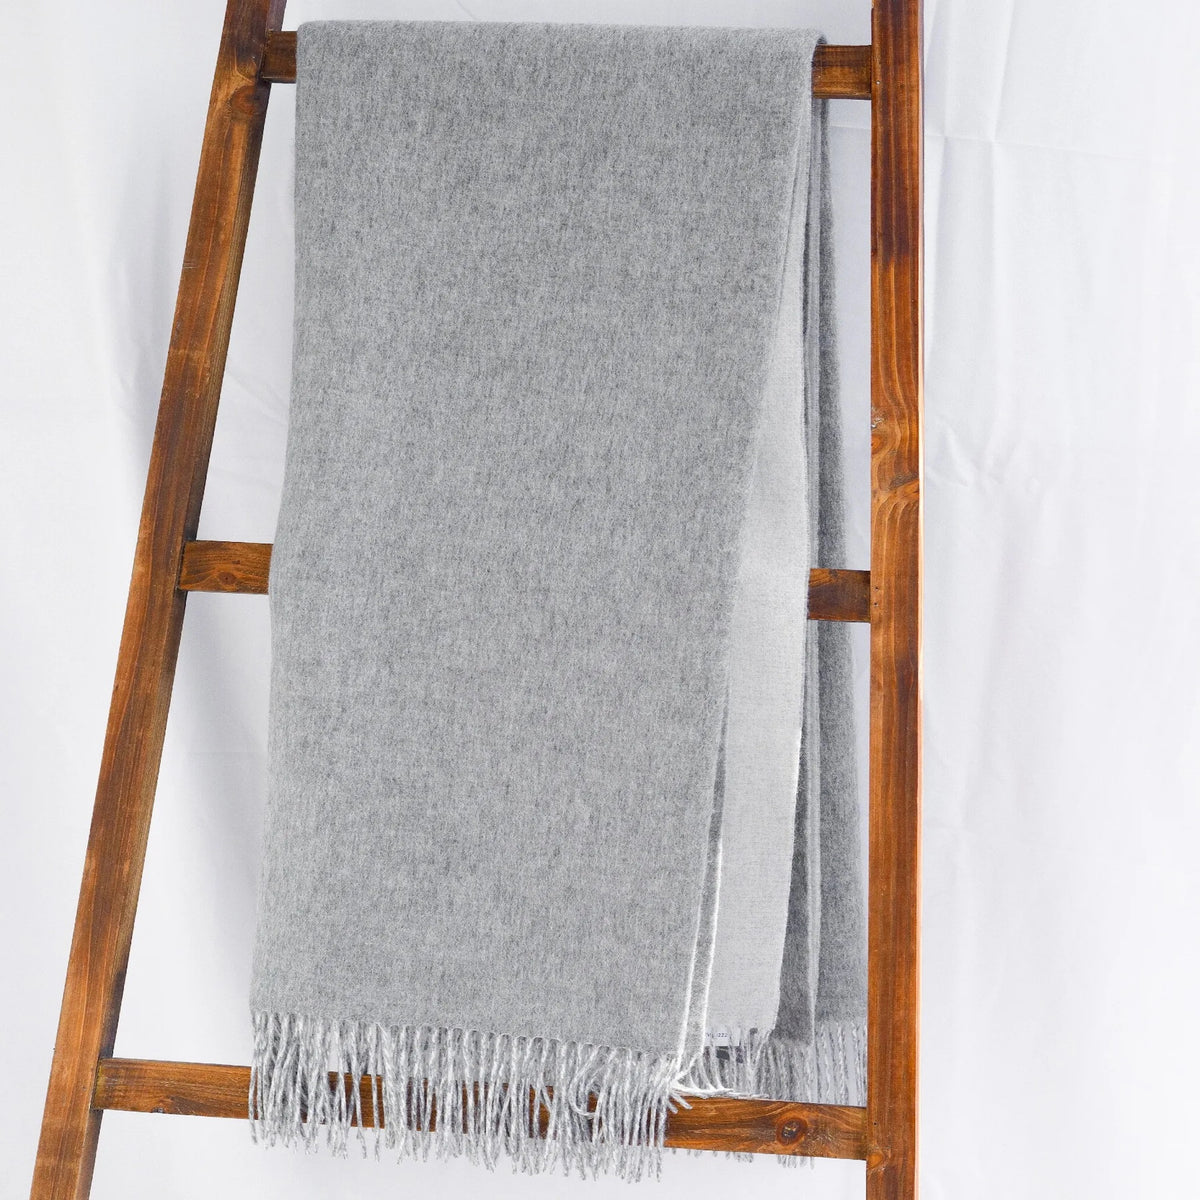 Silo of Alashan Double Faced Classic Cashmere Blend Throw - Ash/White color